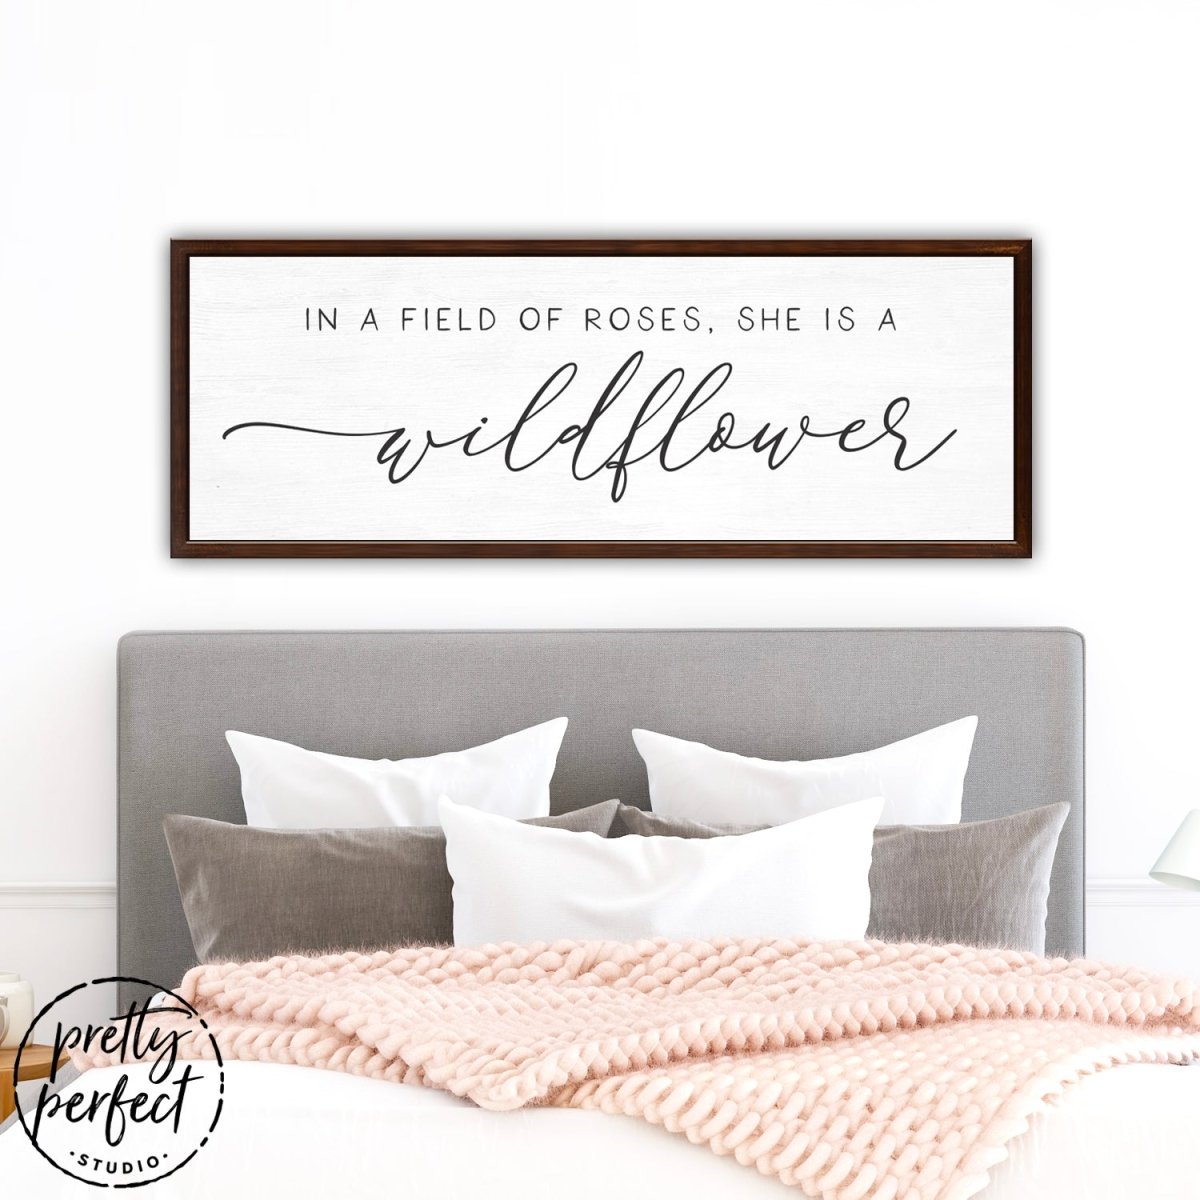 In A Field Of Roses She Is a Wildflower Sign Hanging Above Bed - Pretty Perfect Studio